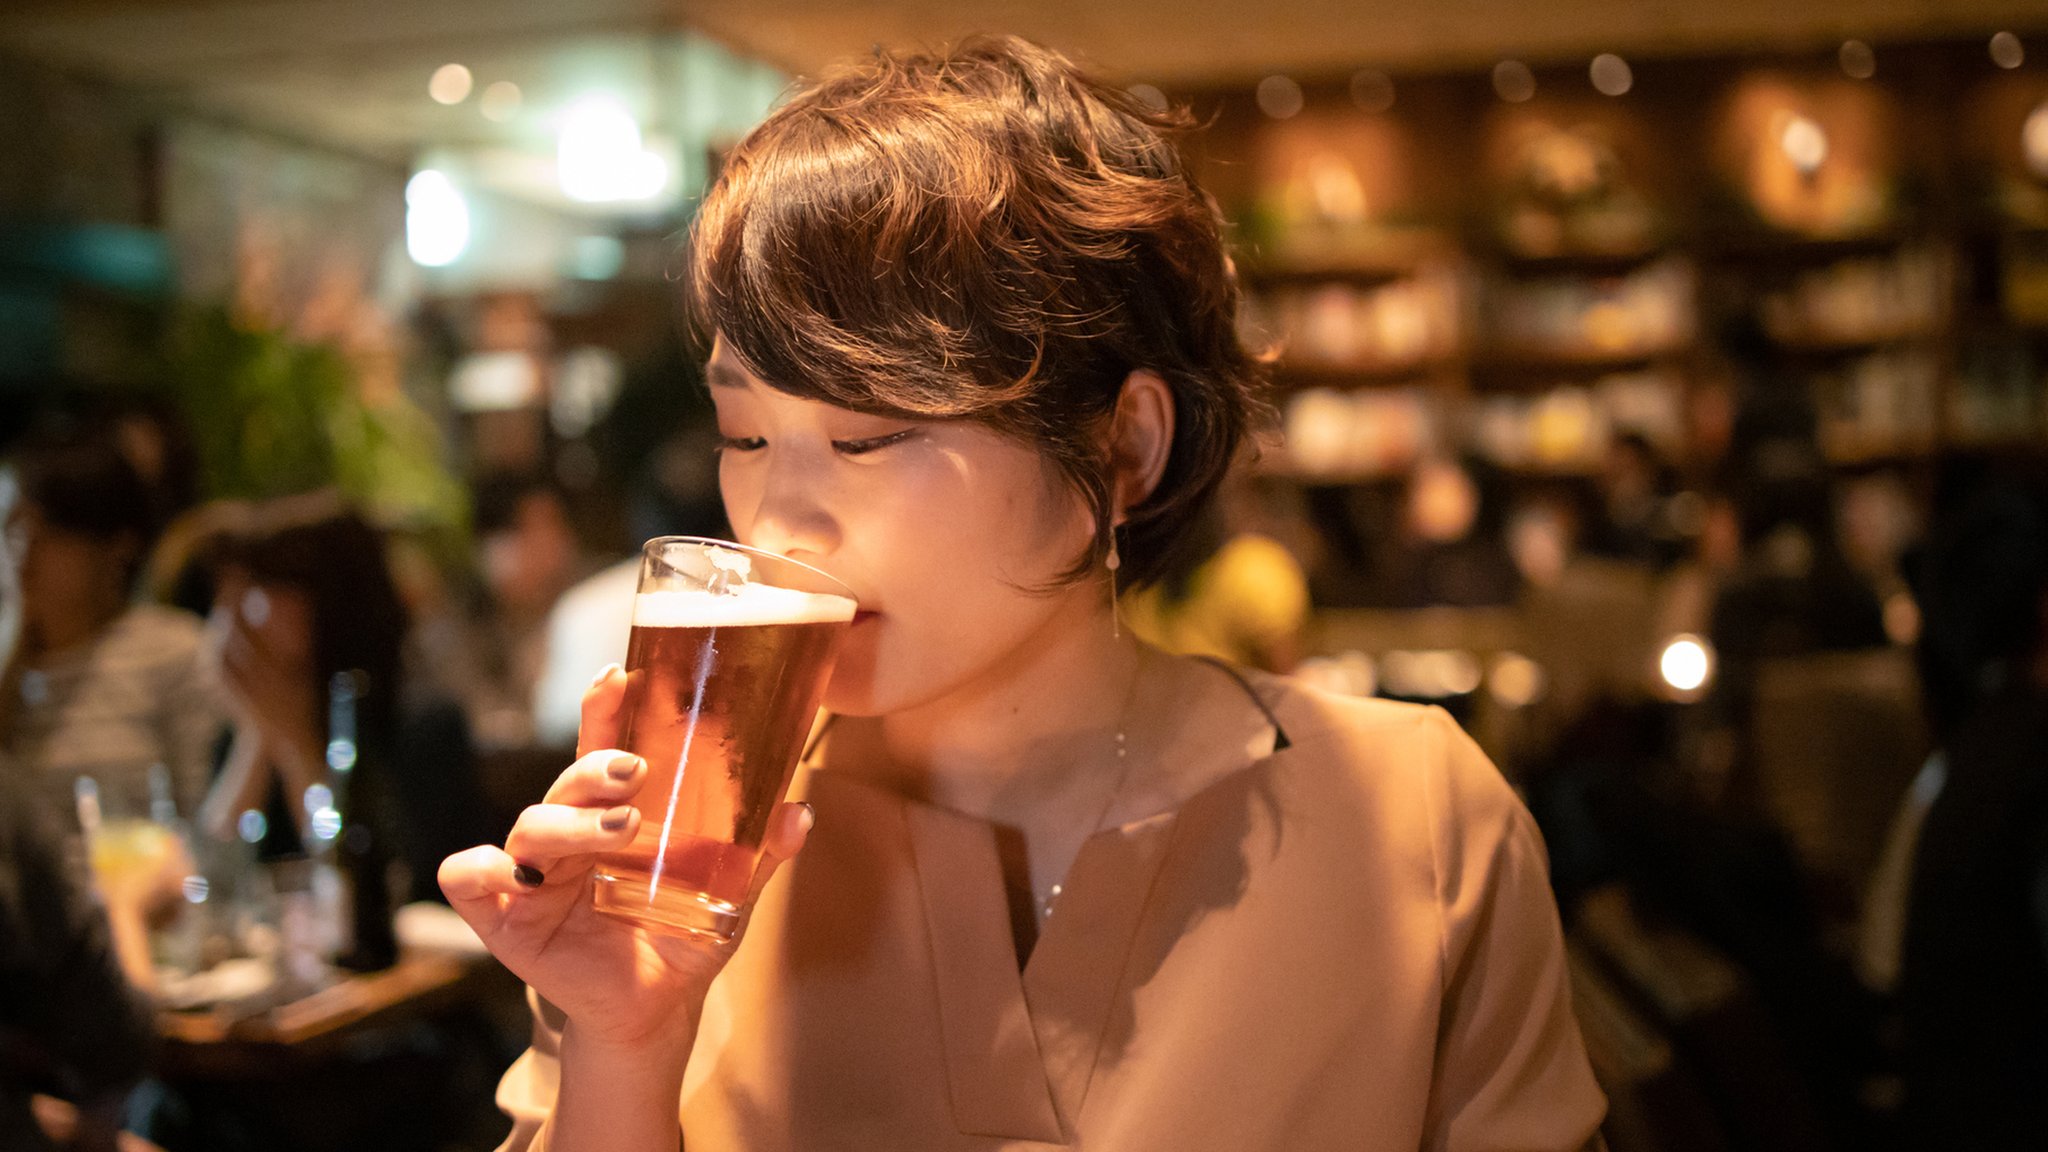 Japan urges its young people to drink more to boost economy photo